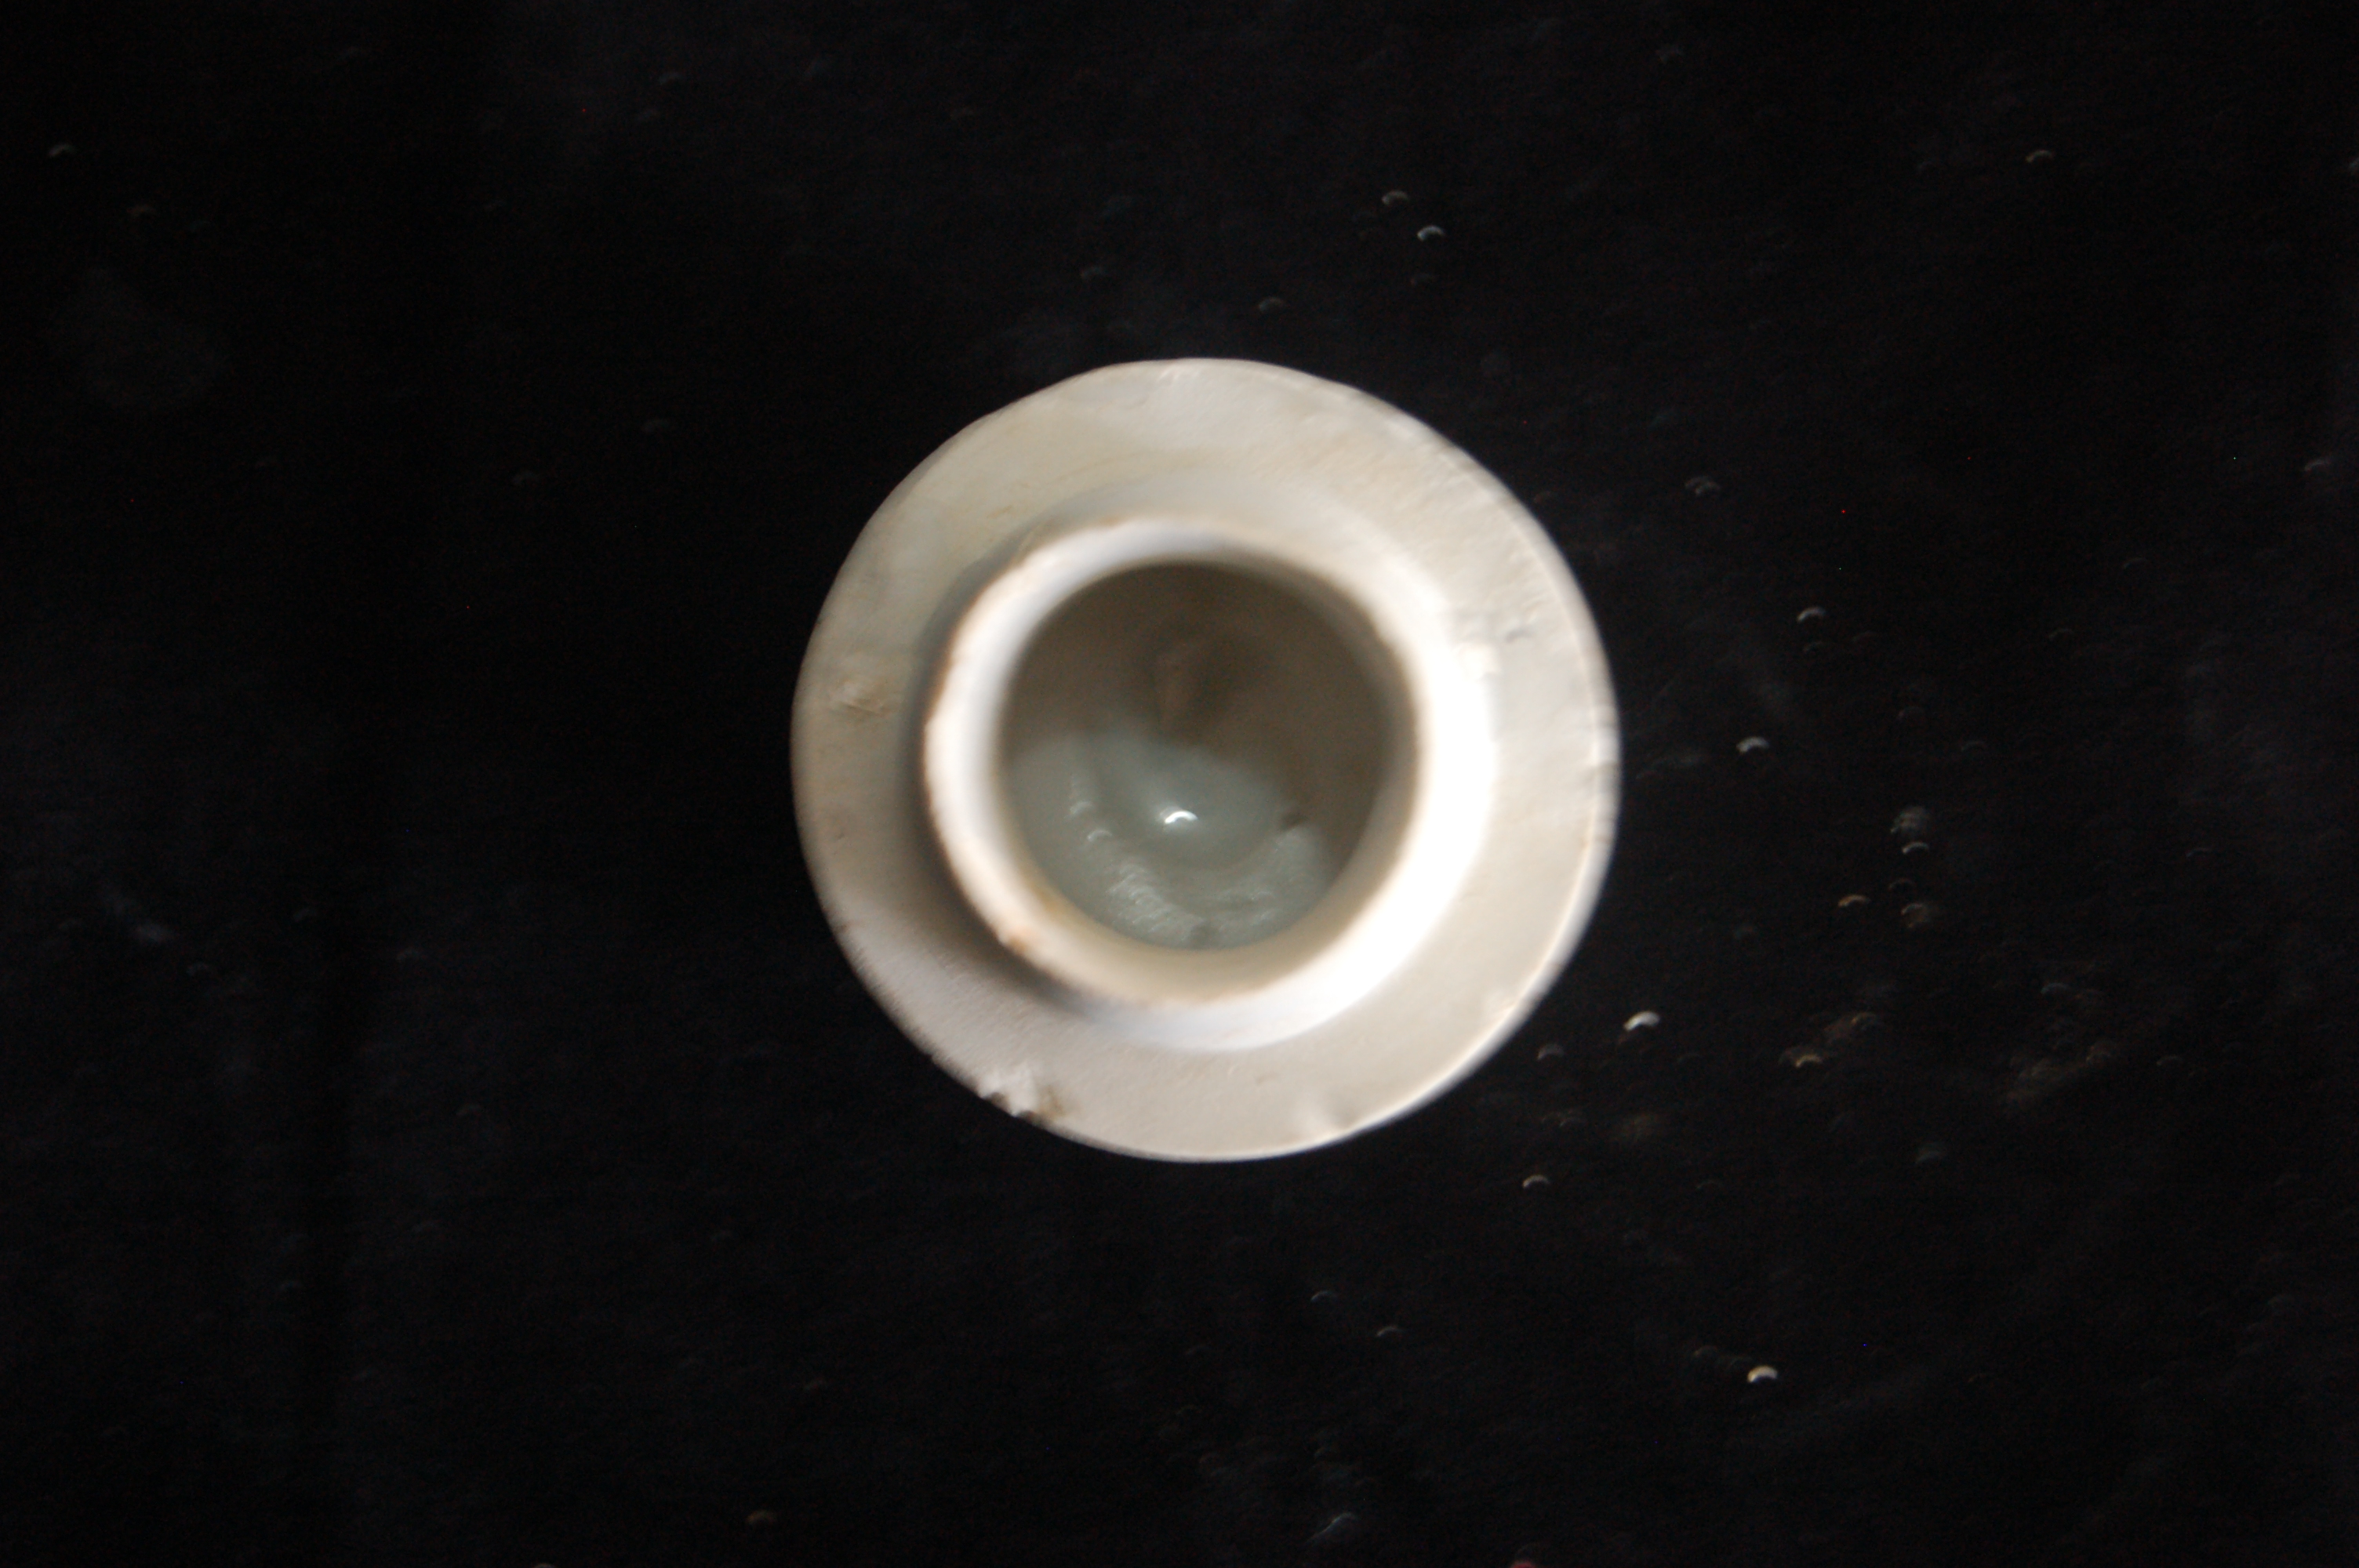 Small covered box base, cylindrical with a tapered flat base. Diameter 5 cm, height 4.5 cm.